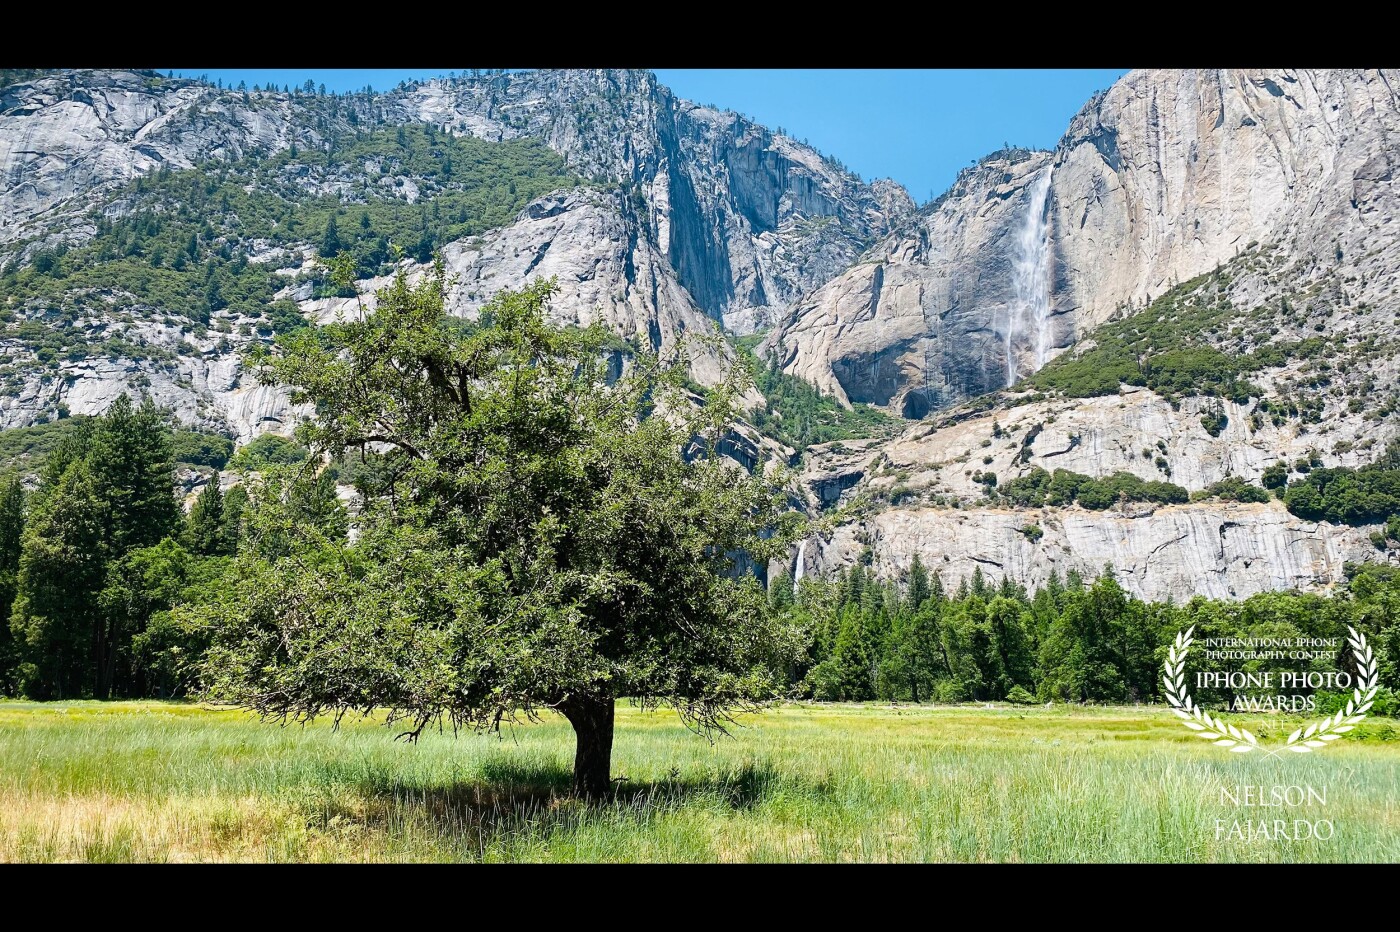 The lone tree at the valley of Yosemite National Park with the background of the Yosemite waterfalls majestically showcasing its might.